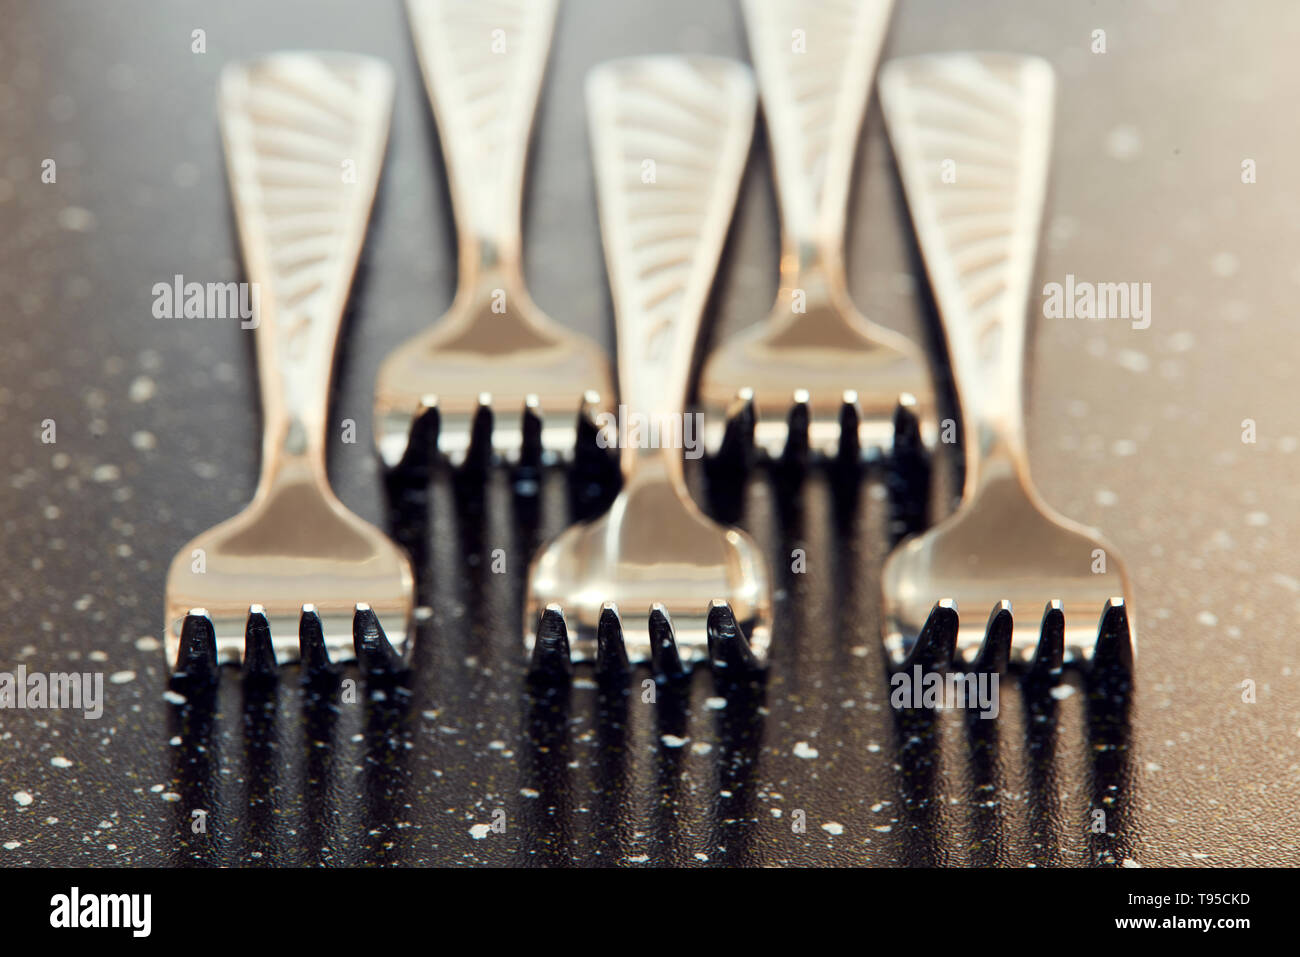 Steel forks on black table. Macro photo for dishware design and kitchen theme. Macro photography of silver forks on table with using focus stacking. Stock Photo